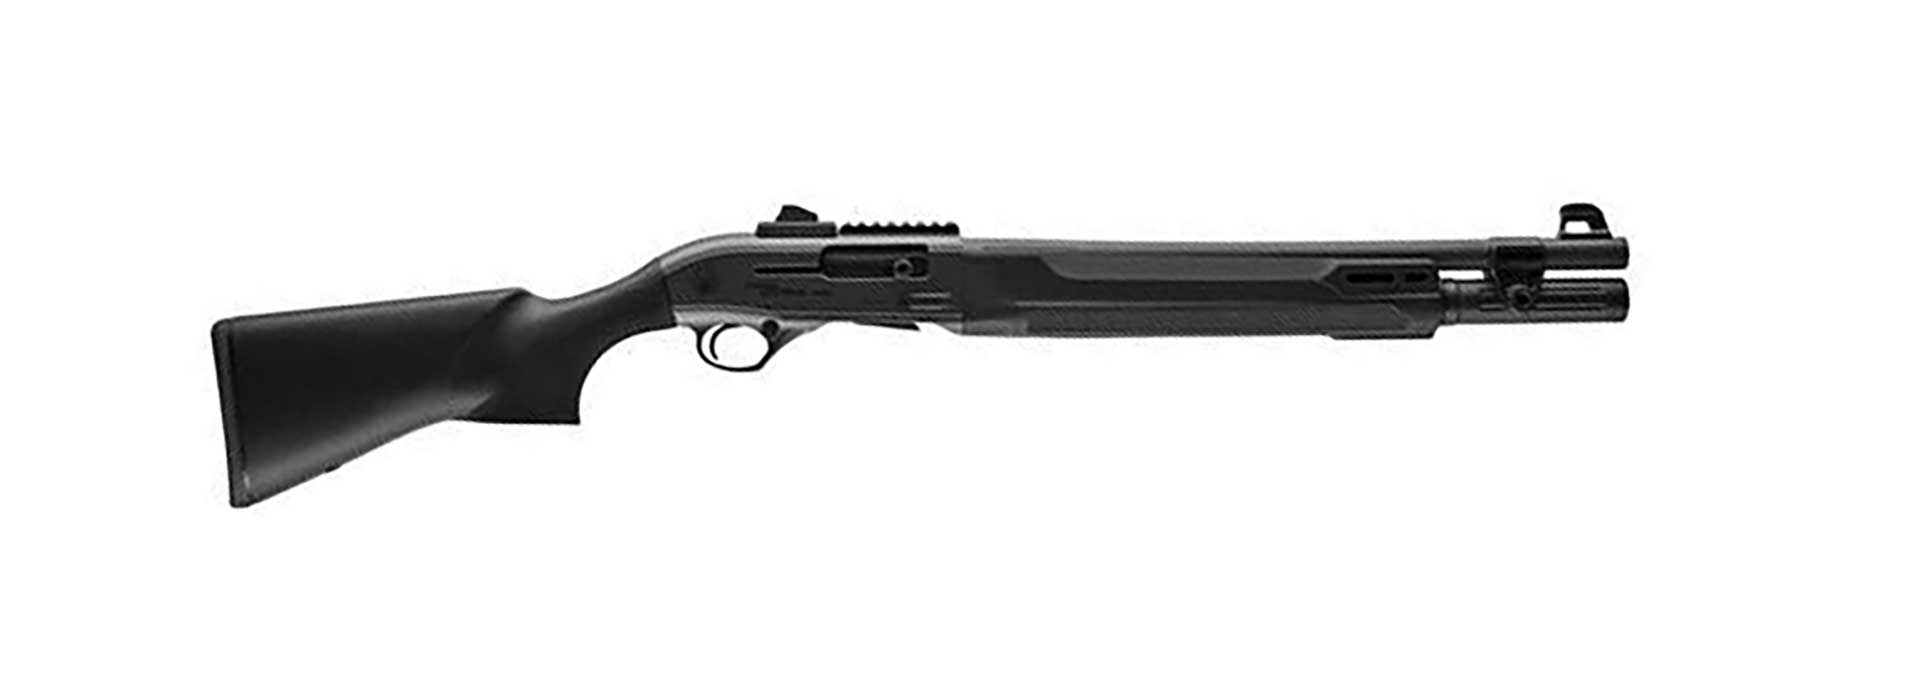 5 Hard-Hitting New Shotguns For 2023 | An Official Journal Of The NRA